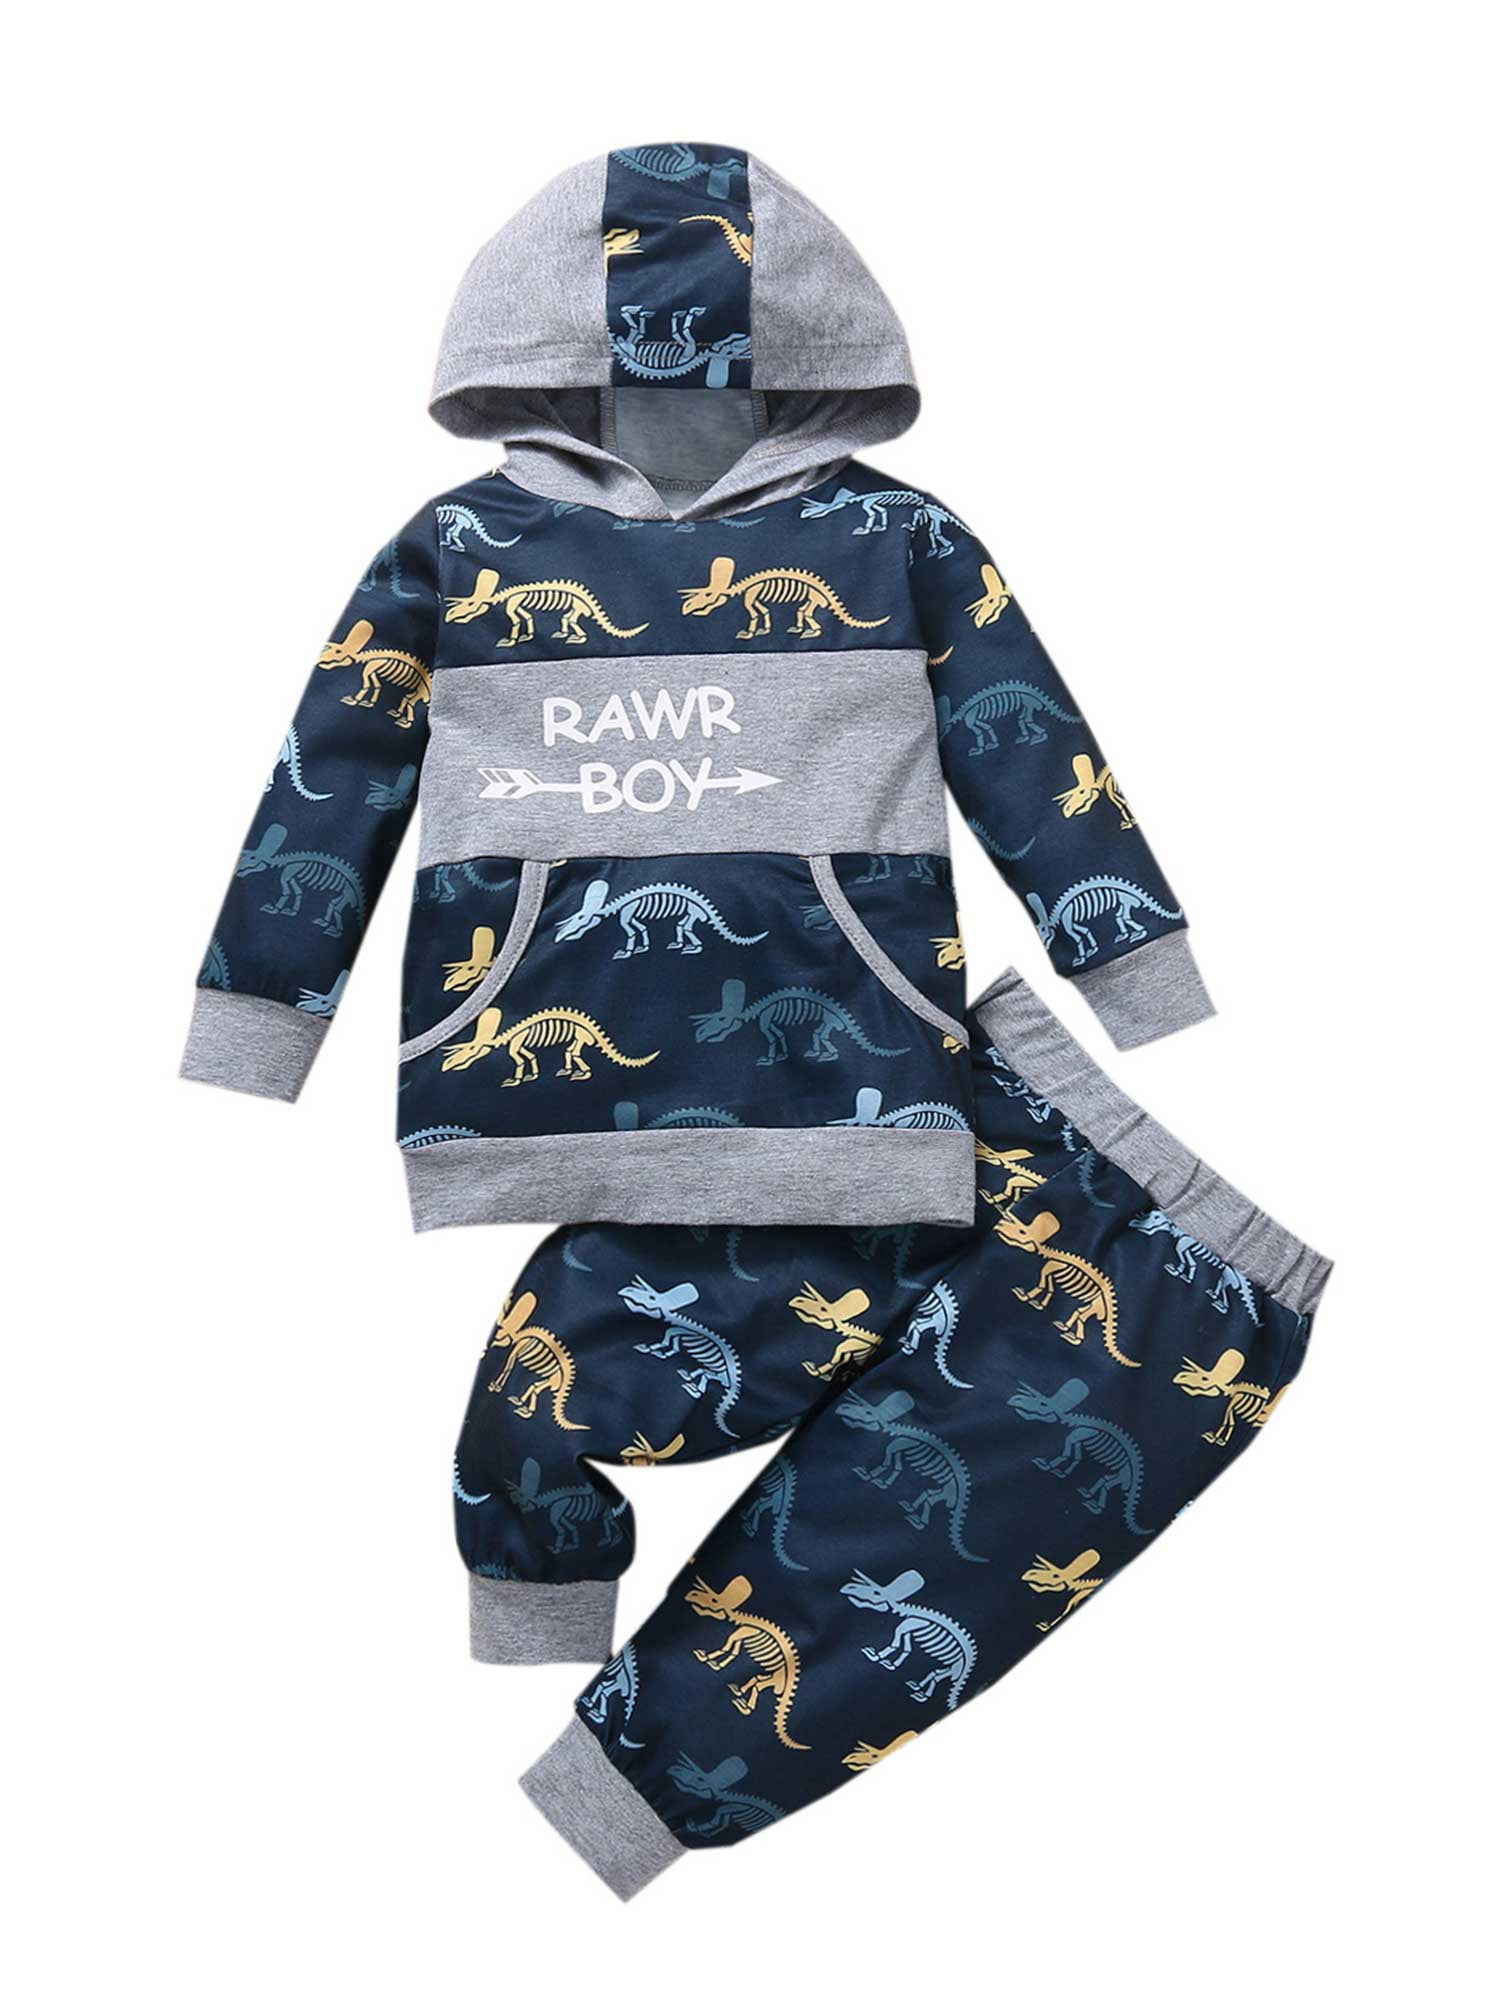 Toddler Baby Unisex Hooded T-Shirt Sweatshirts Infant Letter Blouse Hoodies Tops 